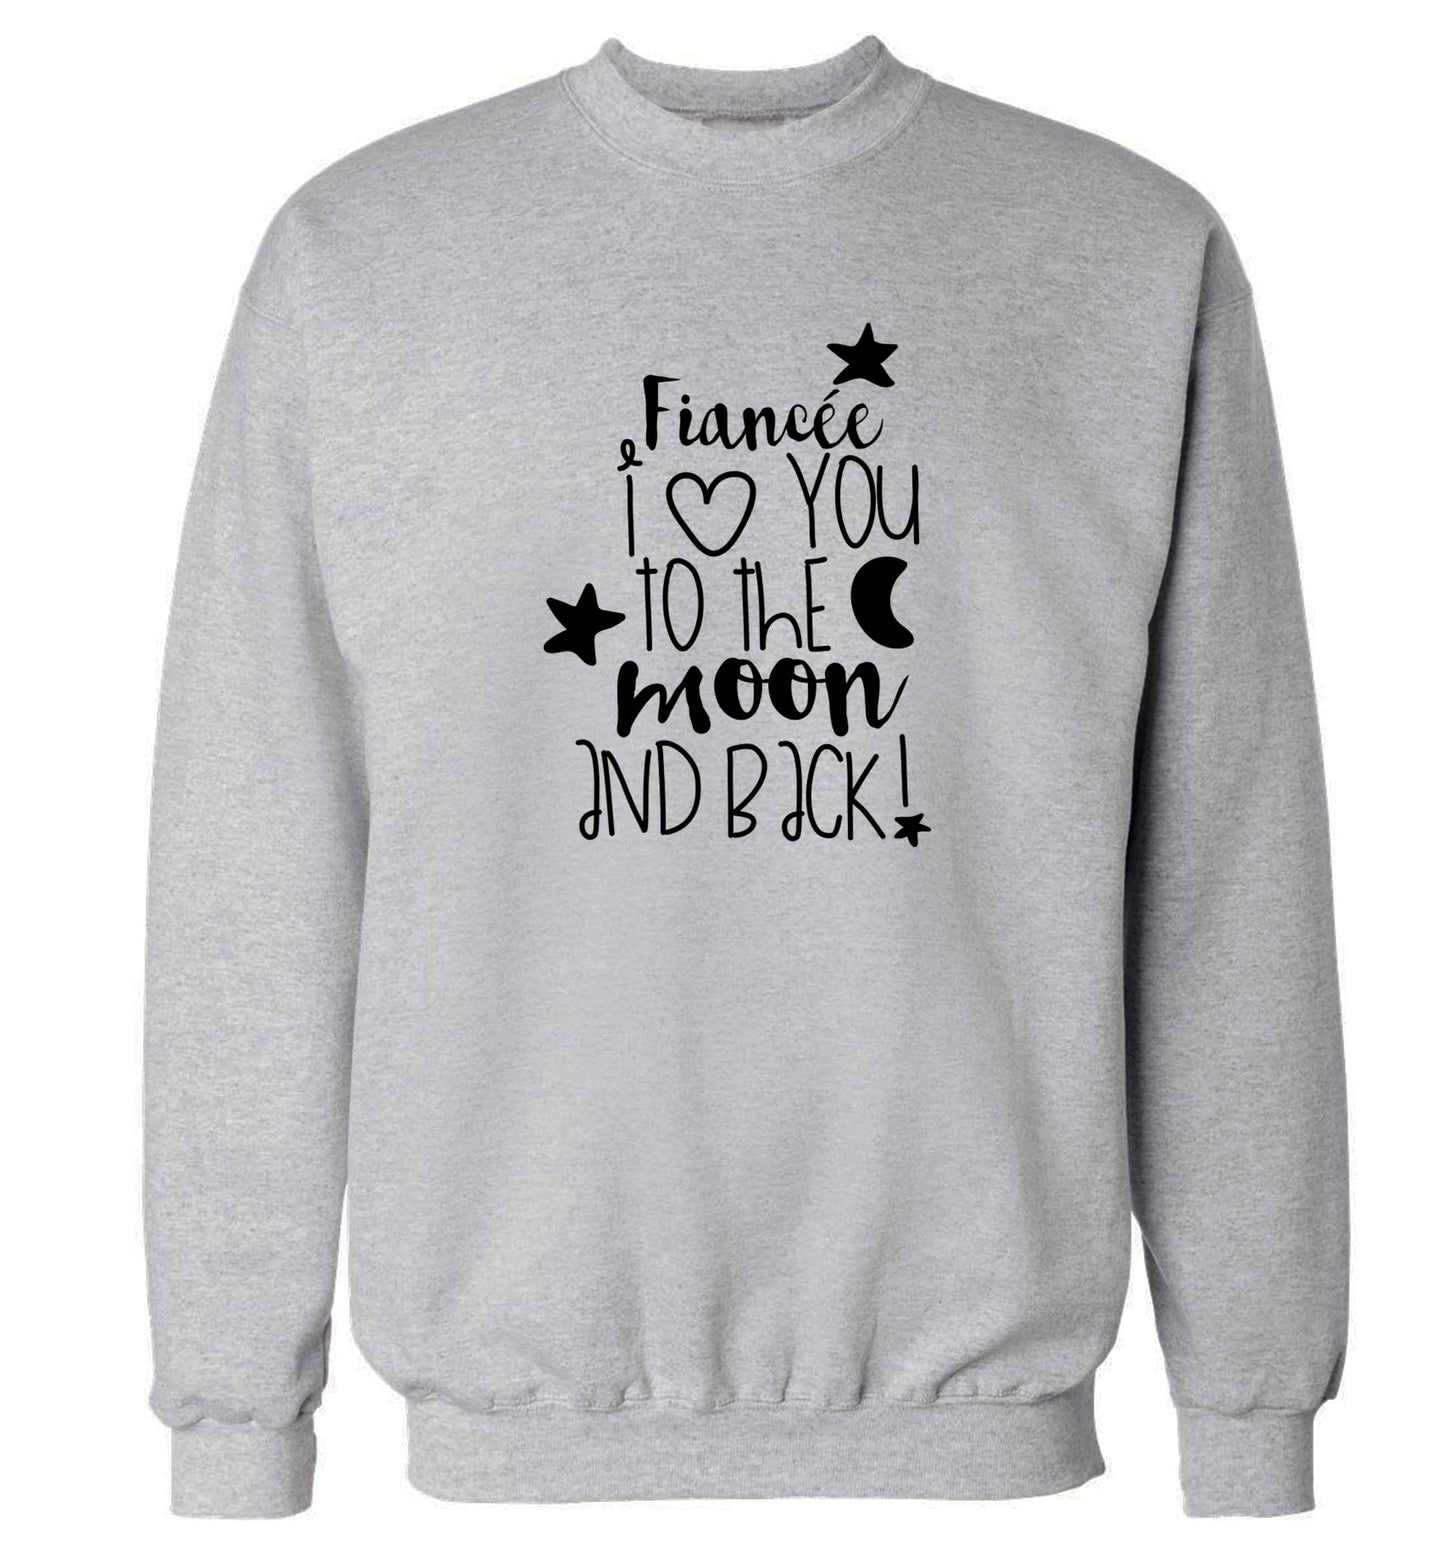 Fiancée I love you to the moon and back adult's unisex grey sweater 2XL